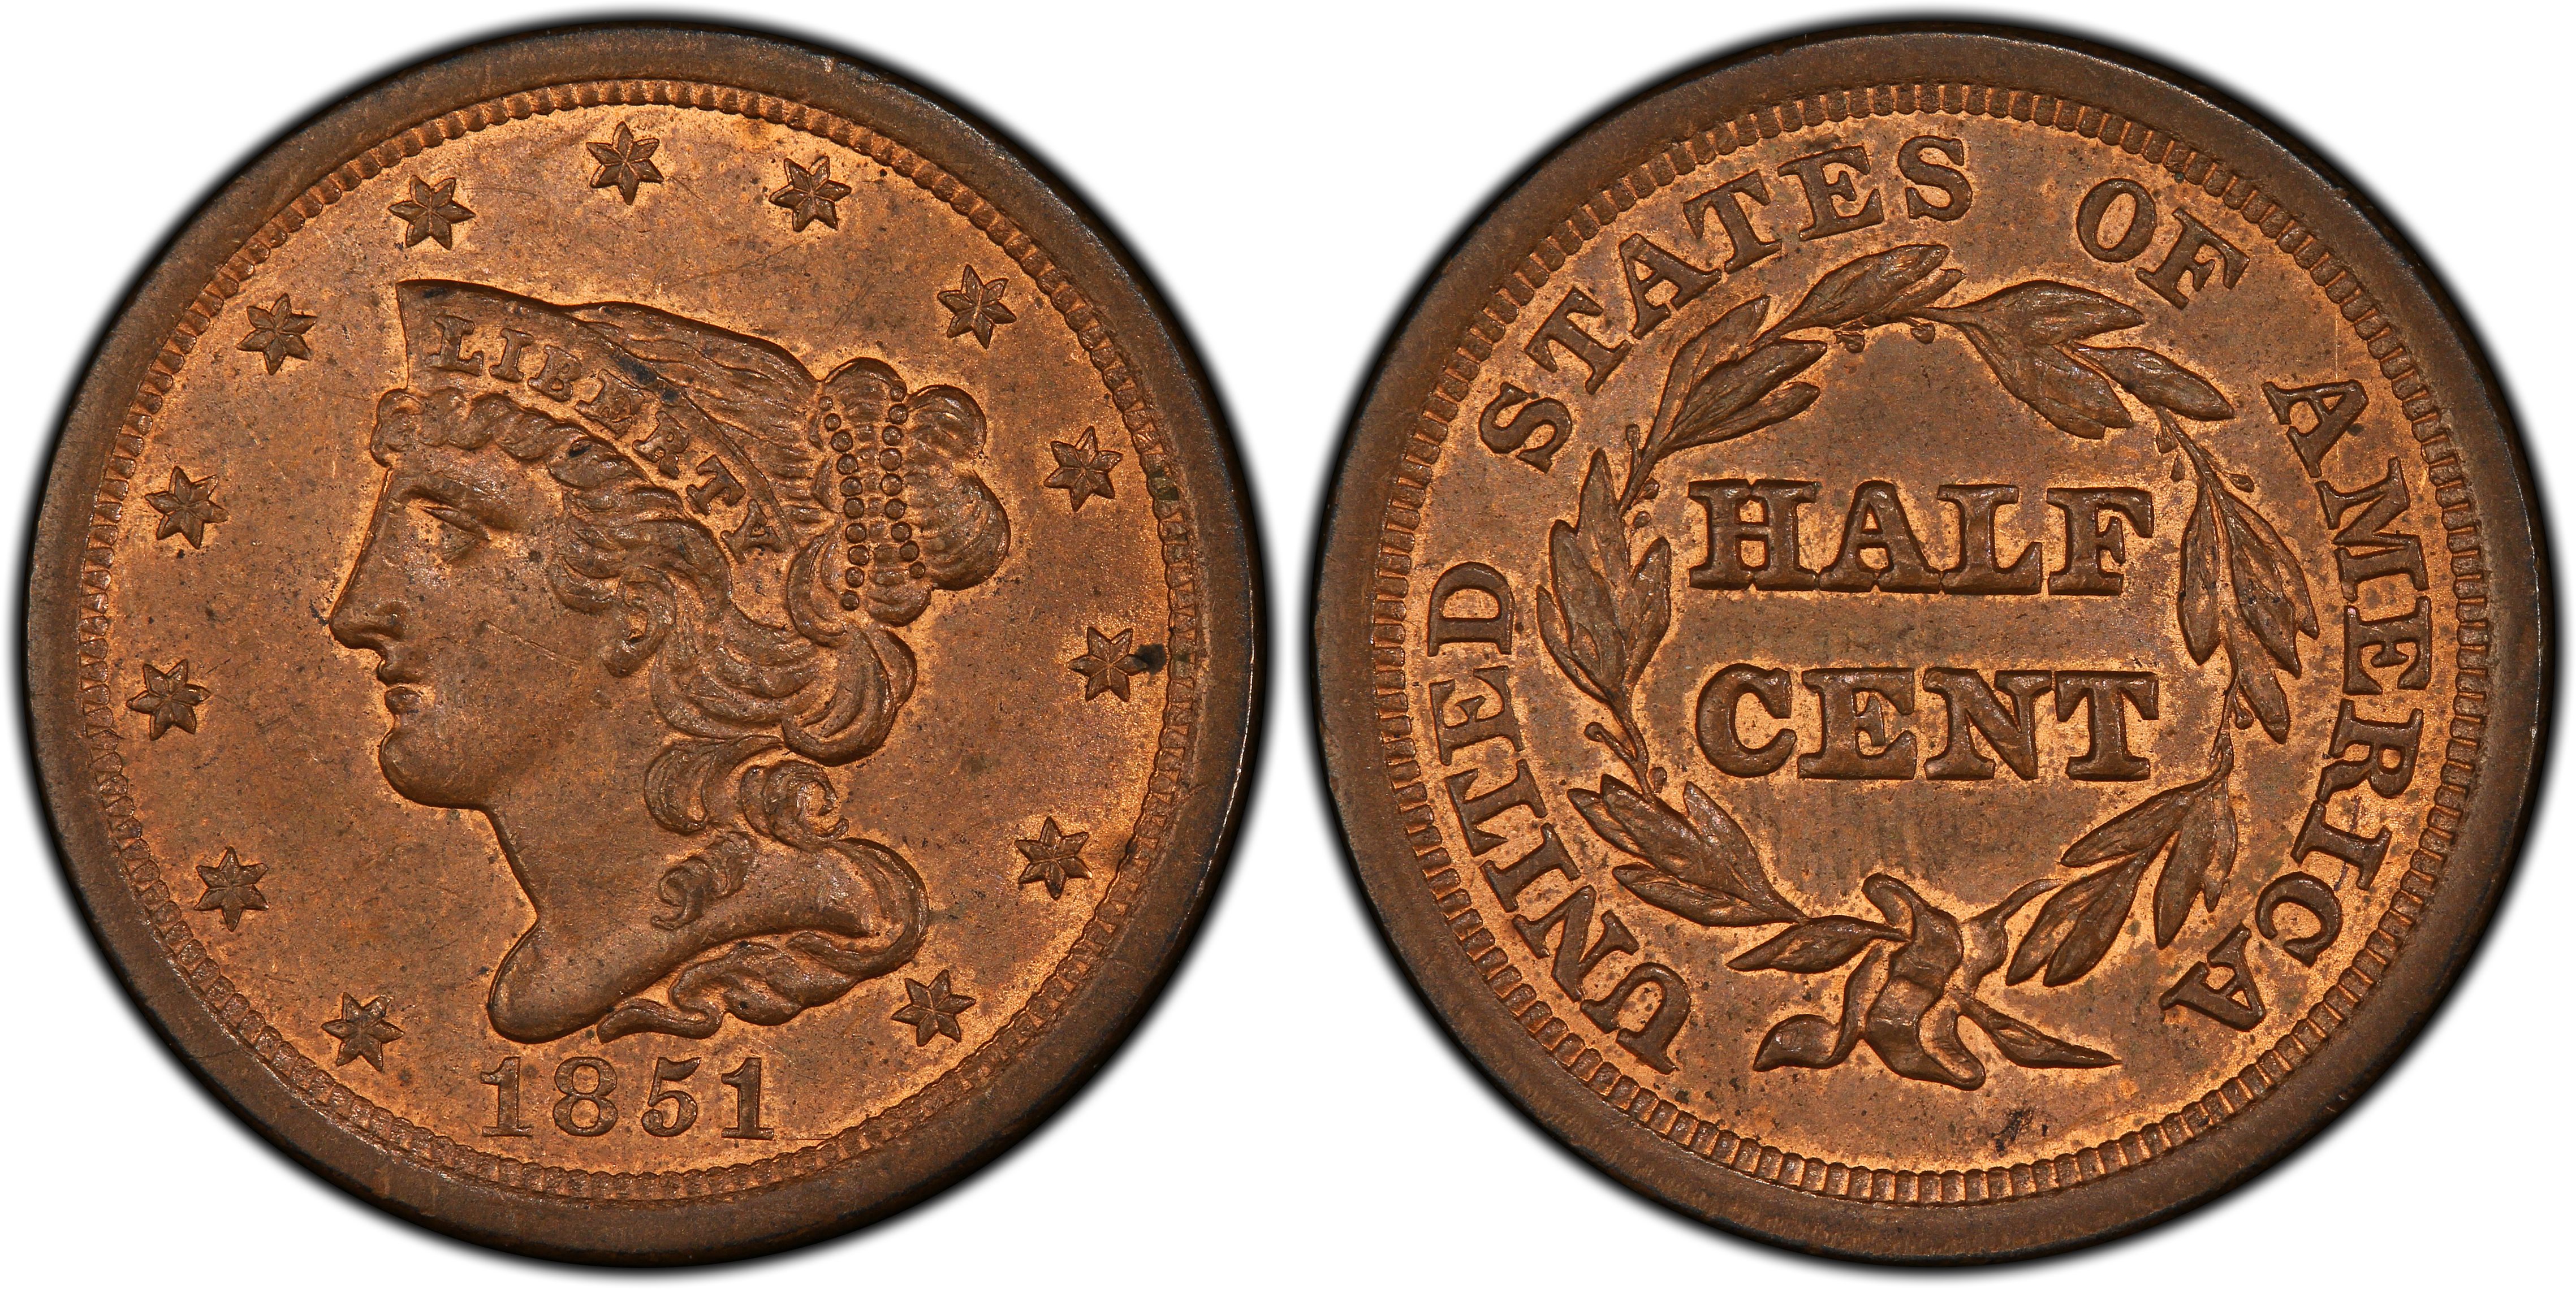 https://images.pcgs.com/CoinFacts/27383261_36719778_2200.jpg